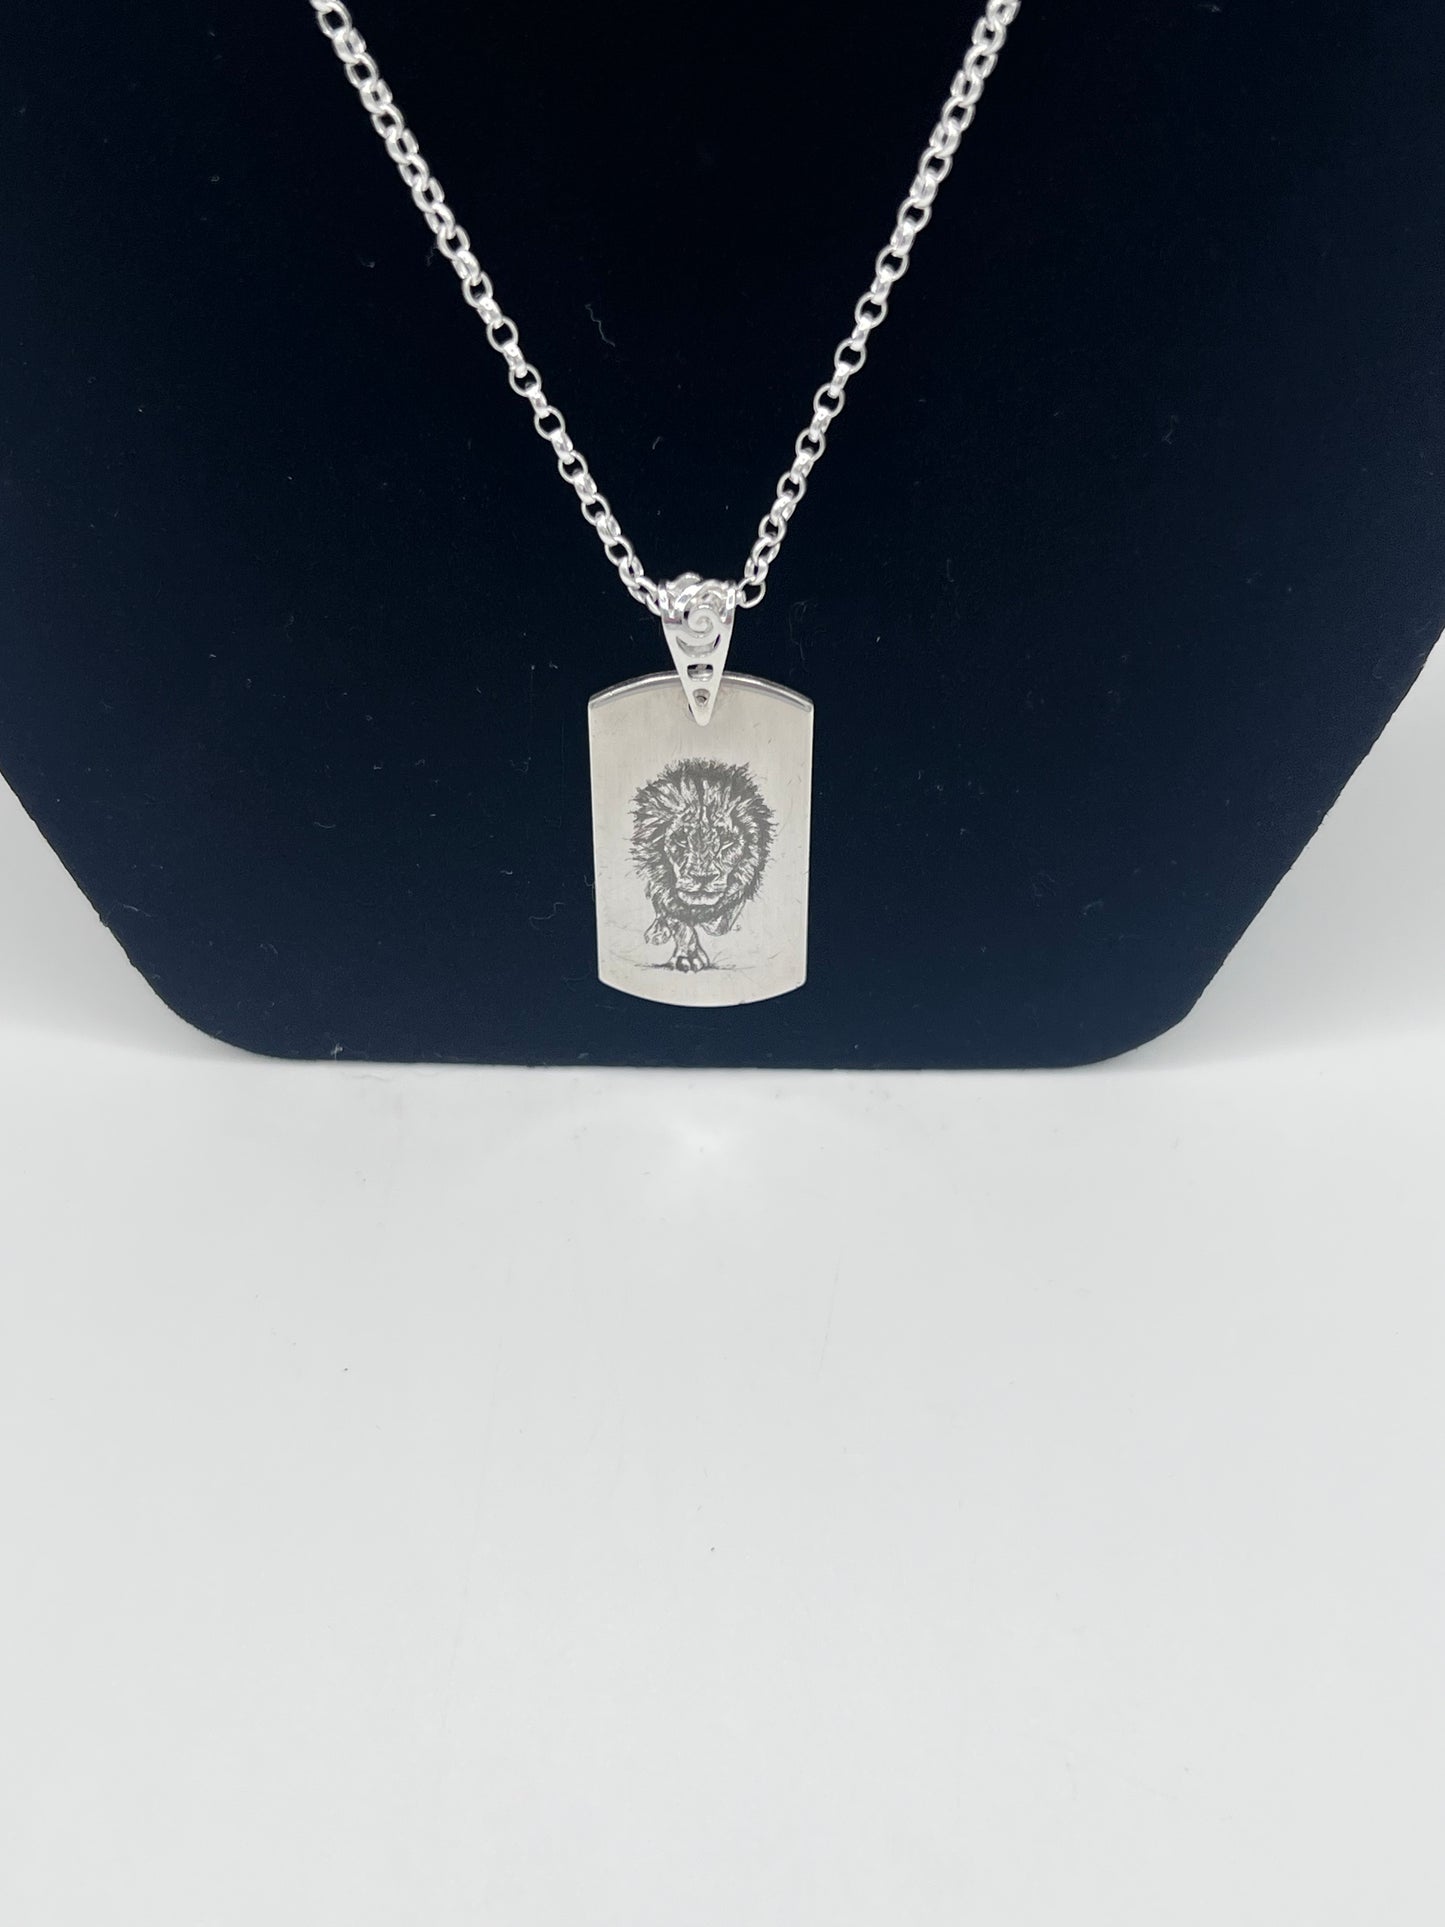 Personalised Gift: Solid Silver Dog Tag, Lion Design, Personalised with Any Message & Solid Silver Belcher Chain